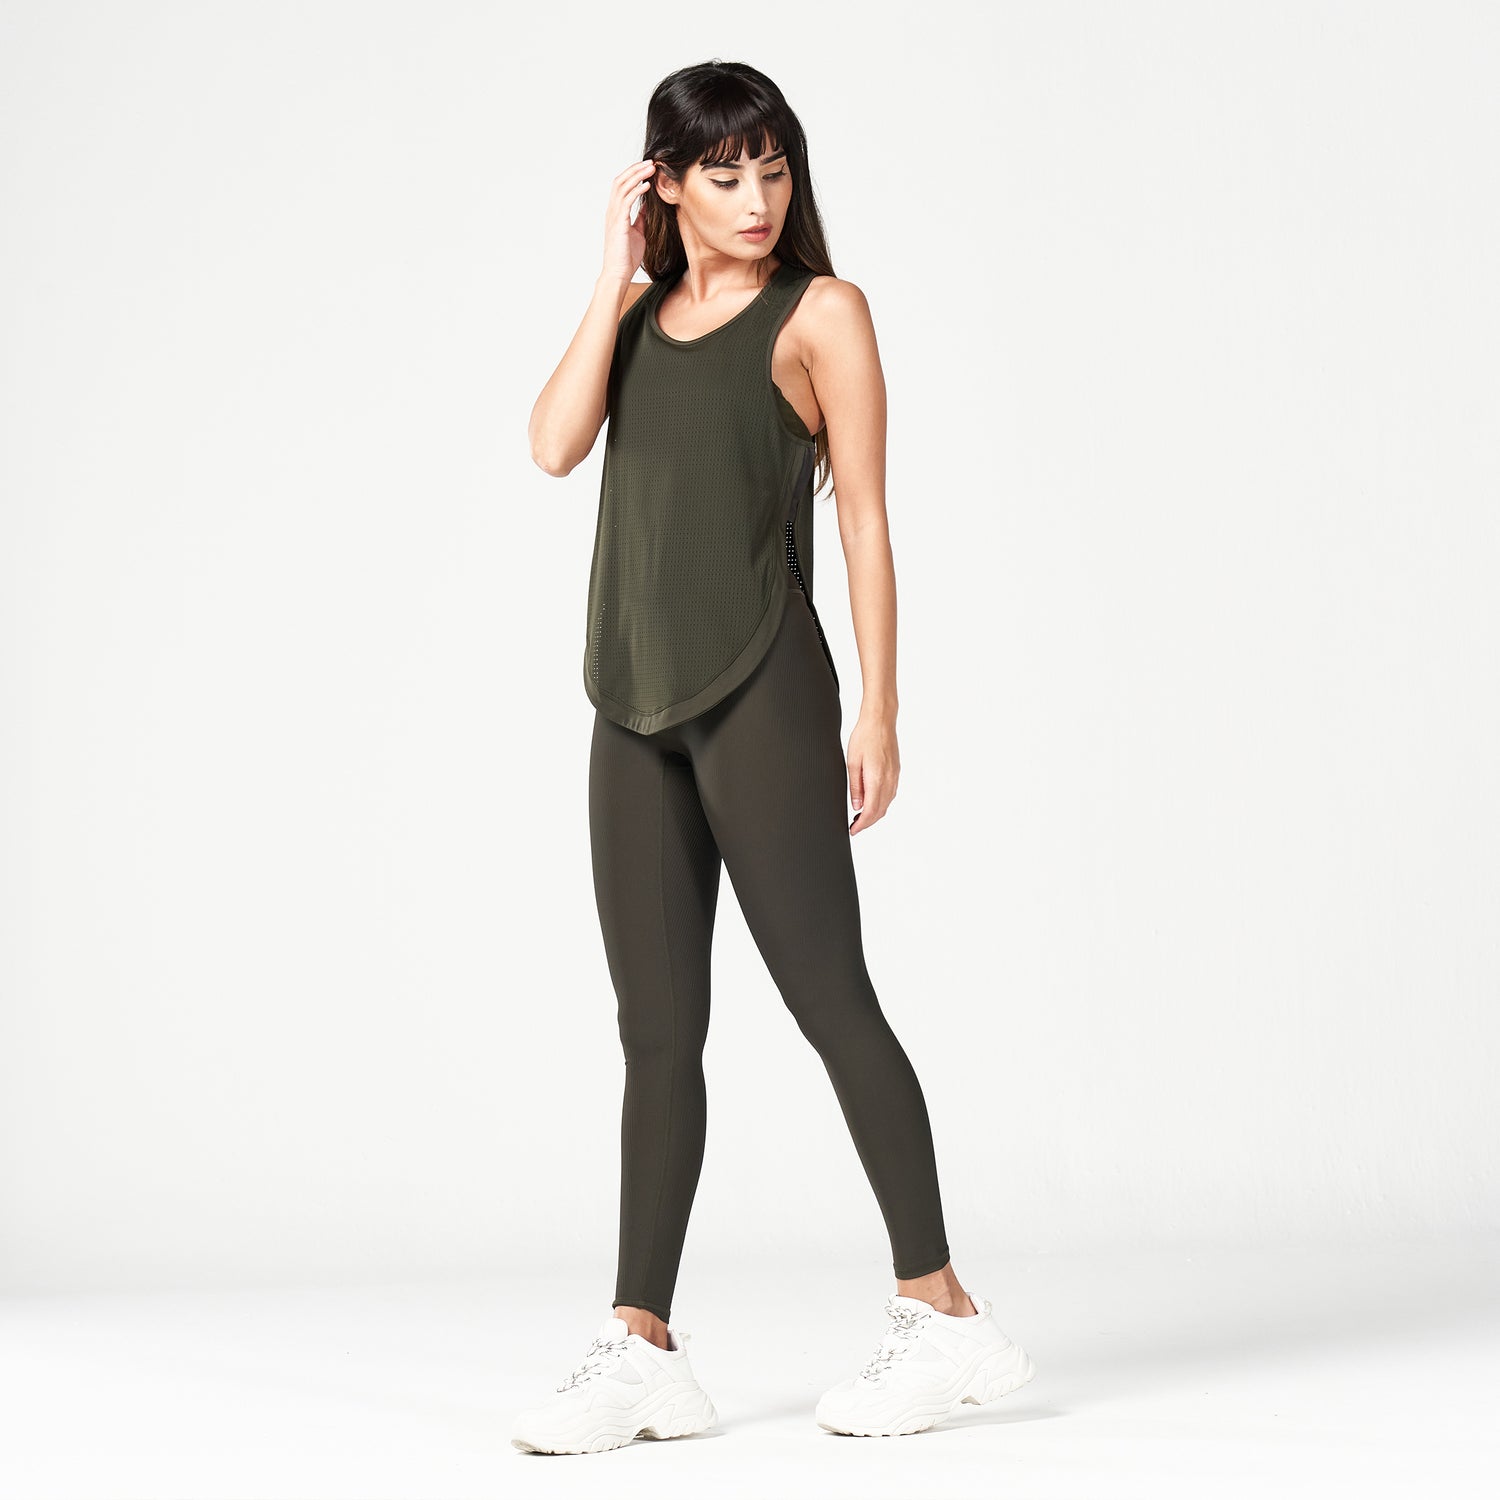 squatwolf-workout-clothes-code-all-day-tank-khaki-gym-tank-tops-for-women